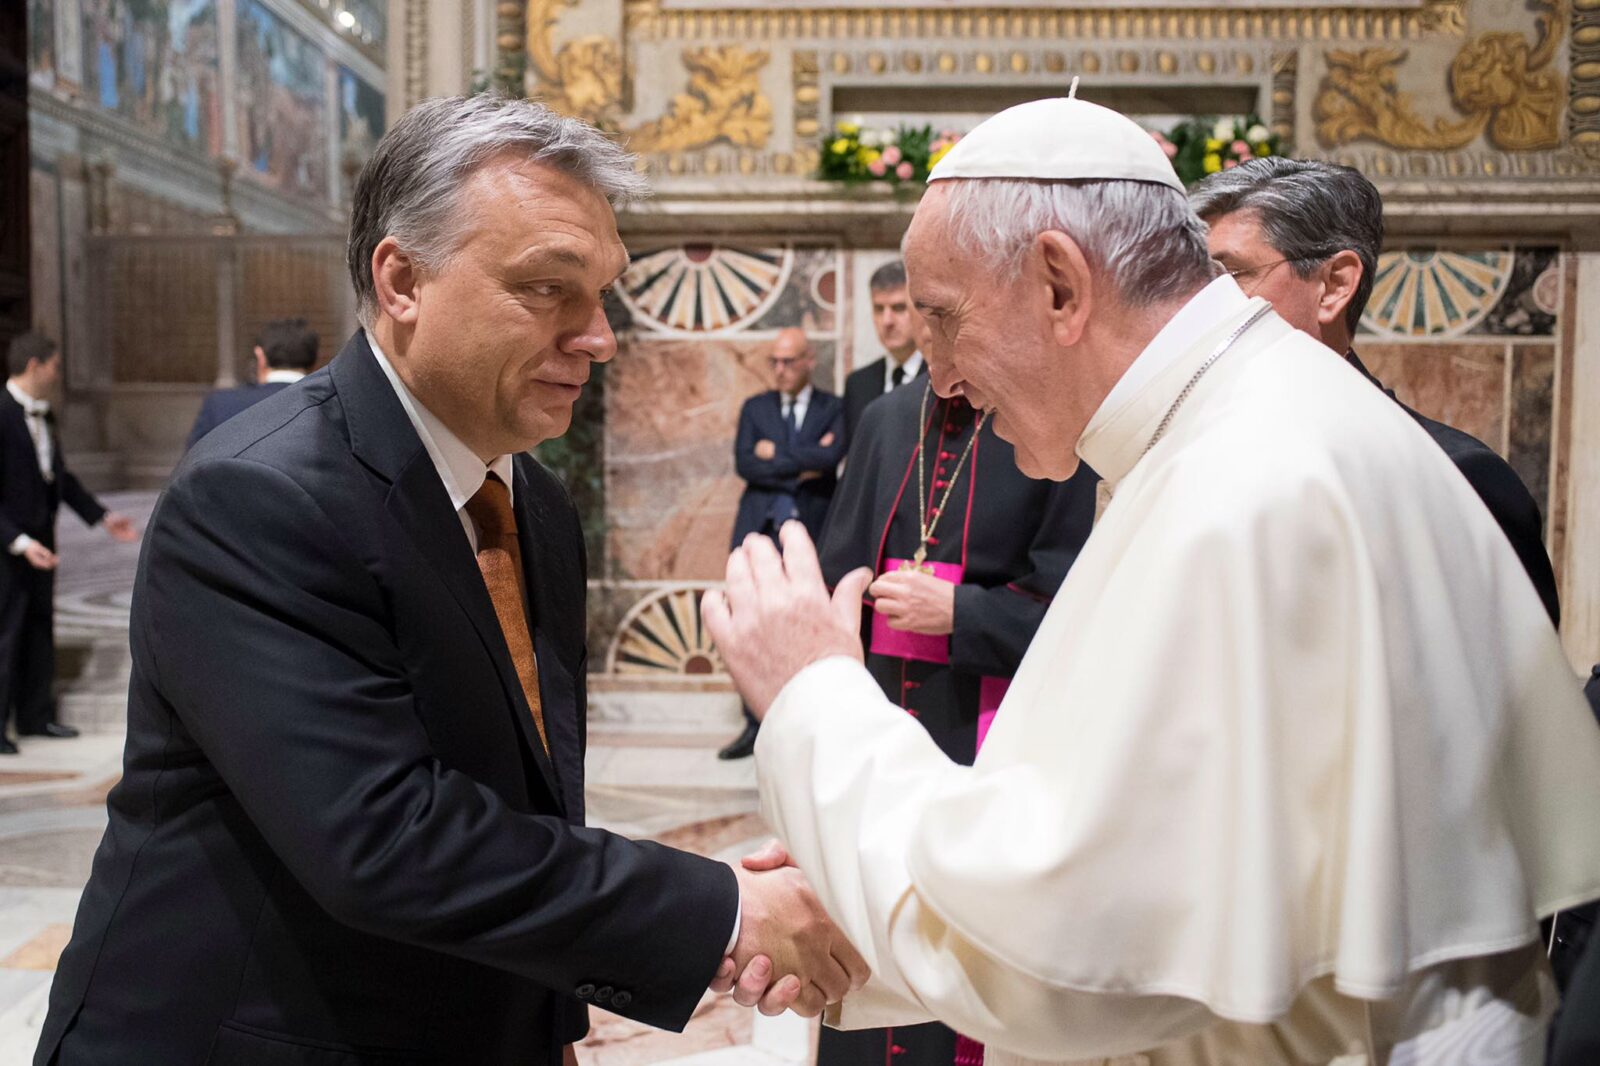 PM Orbán Heads to Vatican for First Post-Election Visit